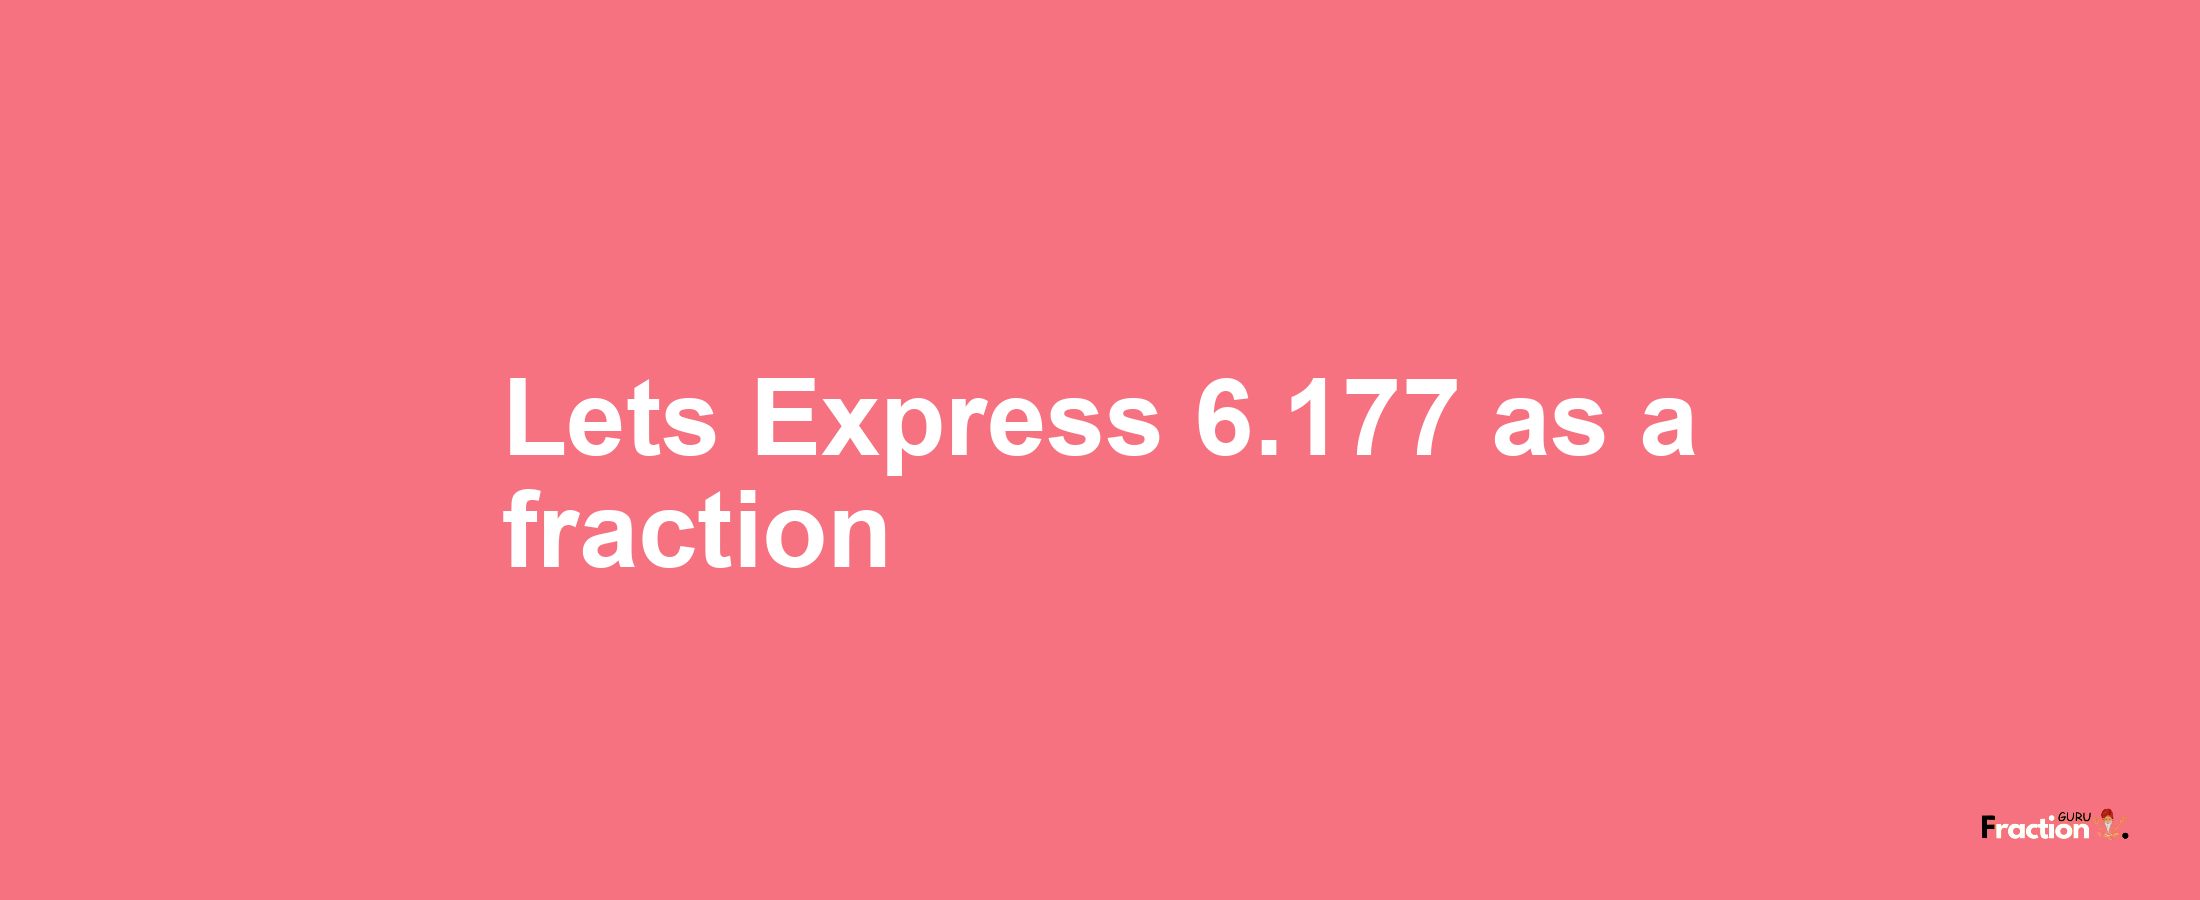 Lets Express 6.177 as afraction